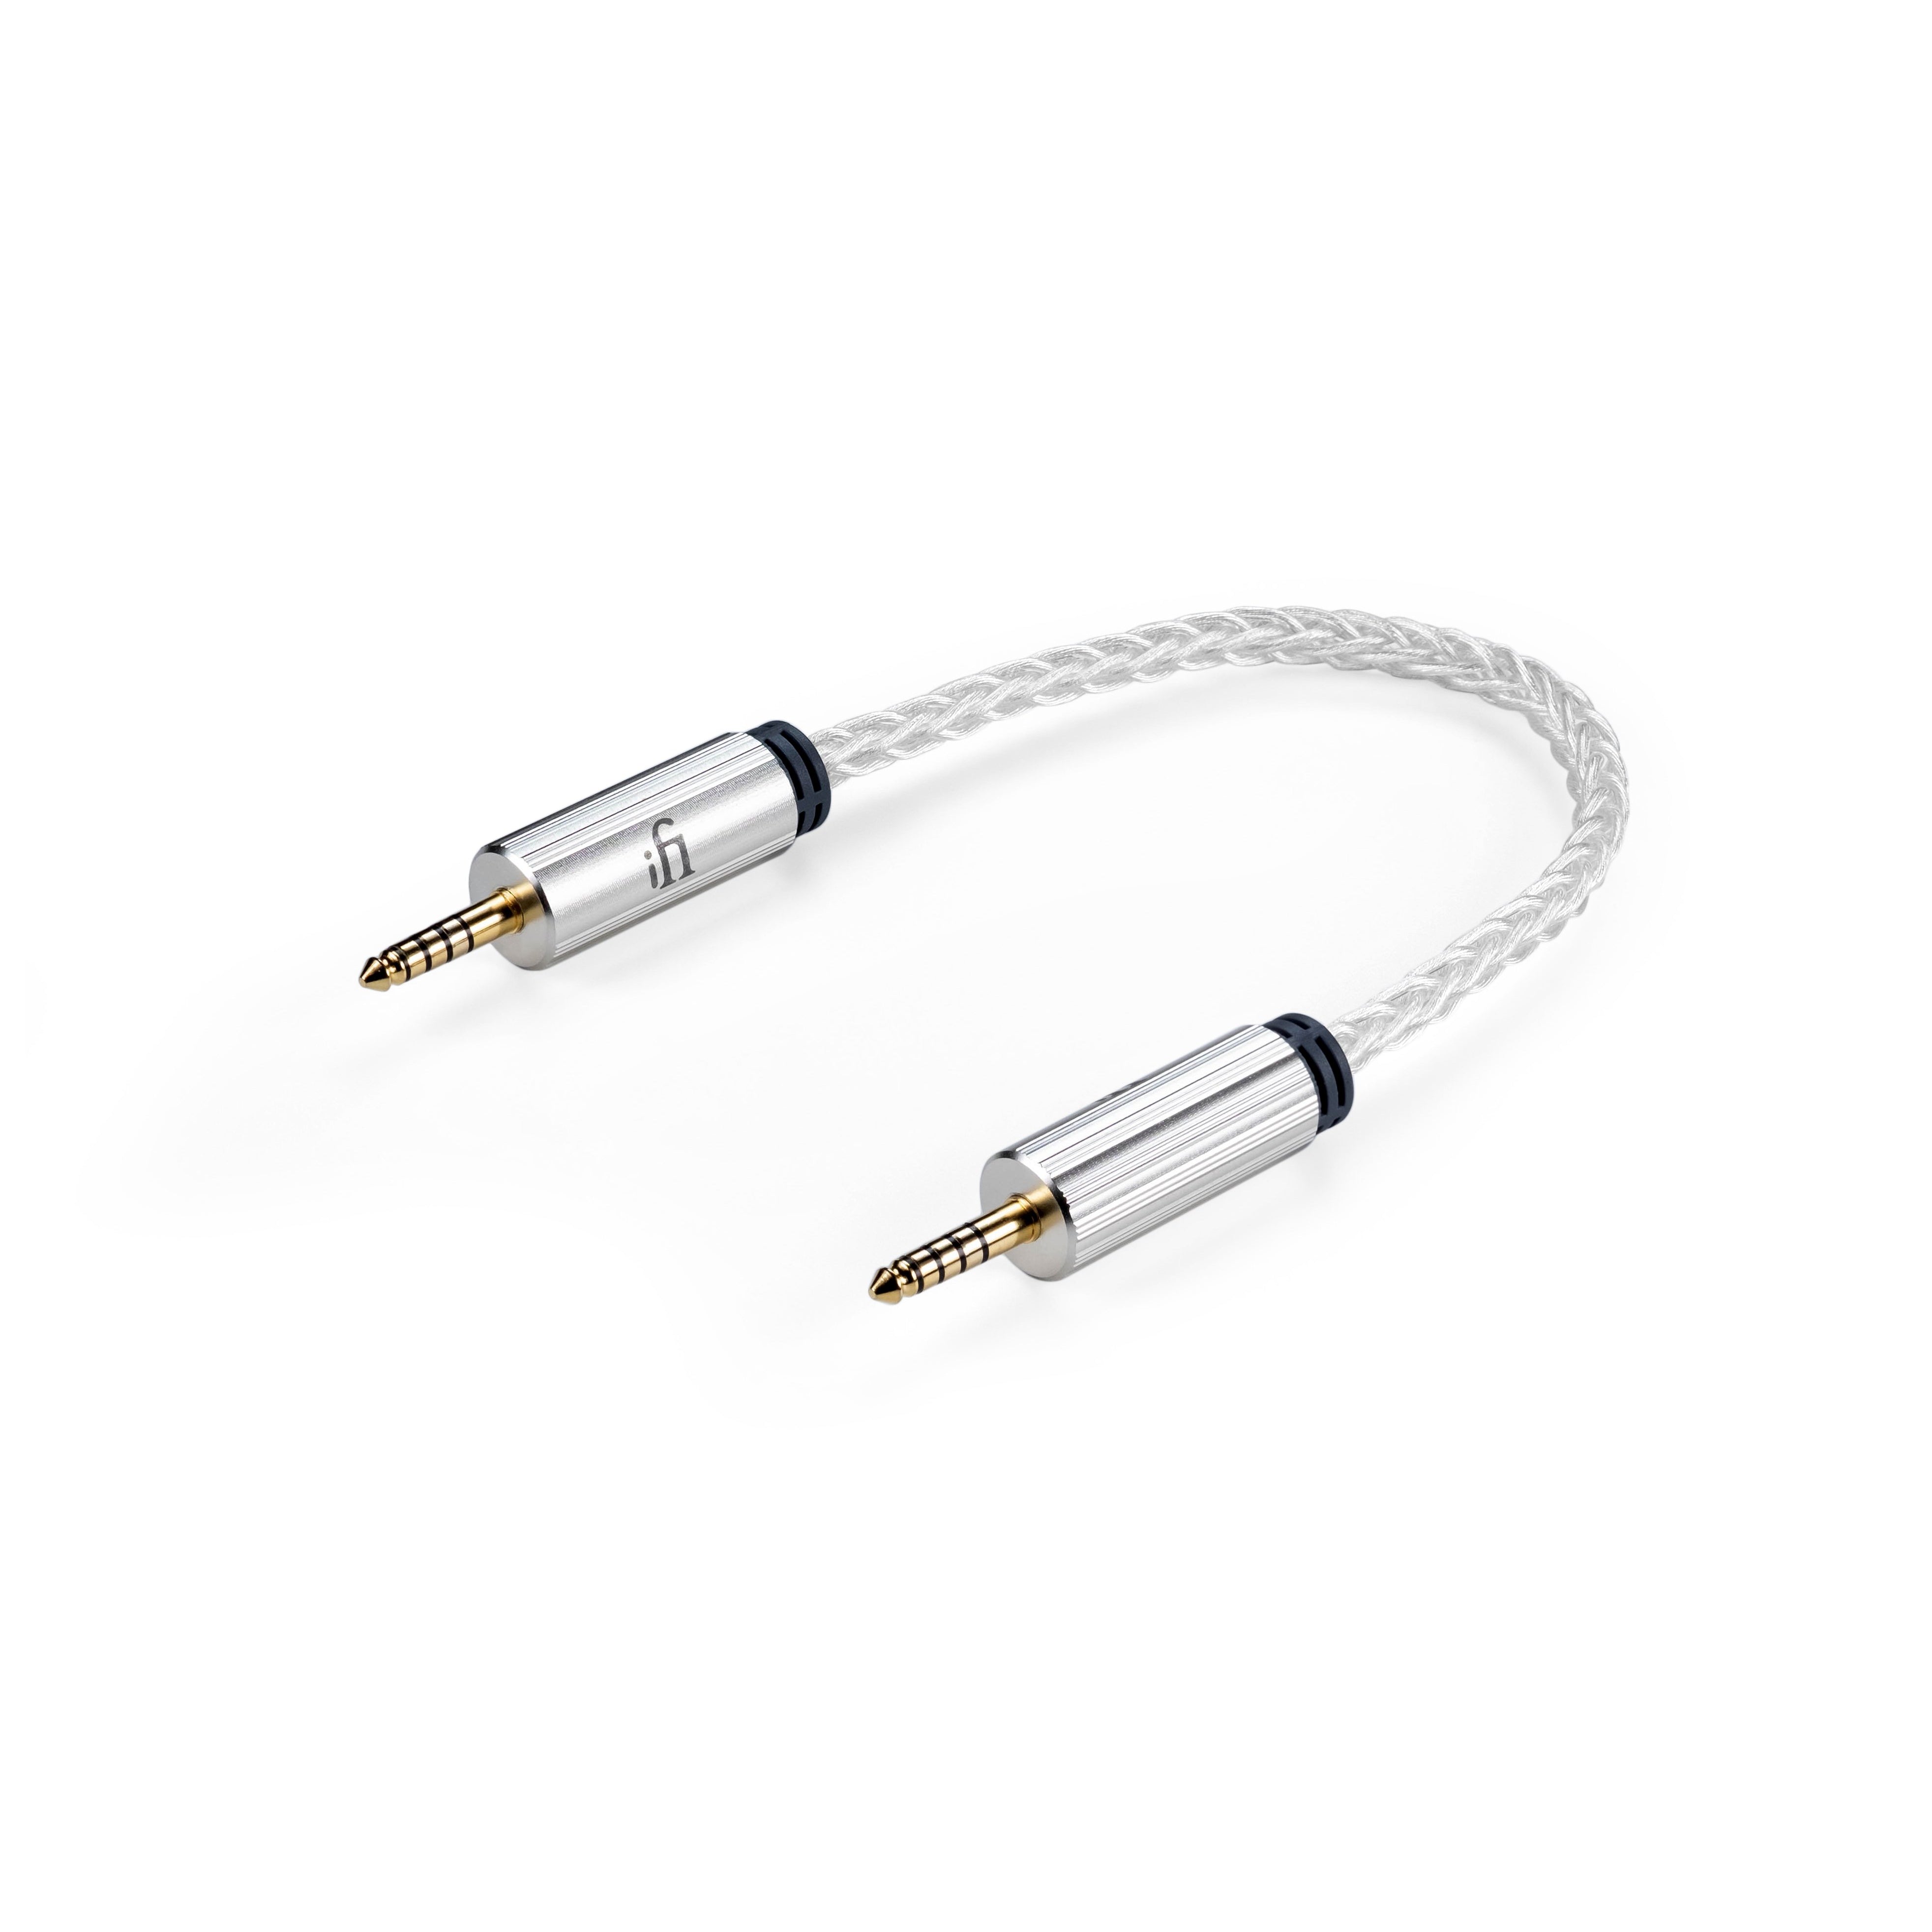 iFi Balanced 4.4mm to 4.4mm Cable | Bloom Audio